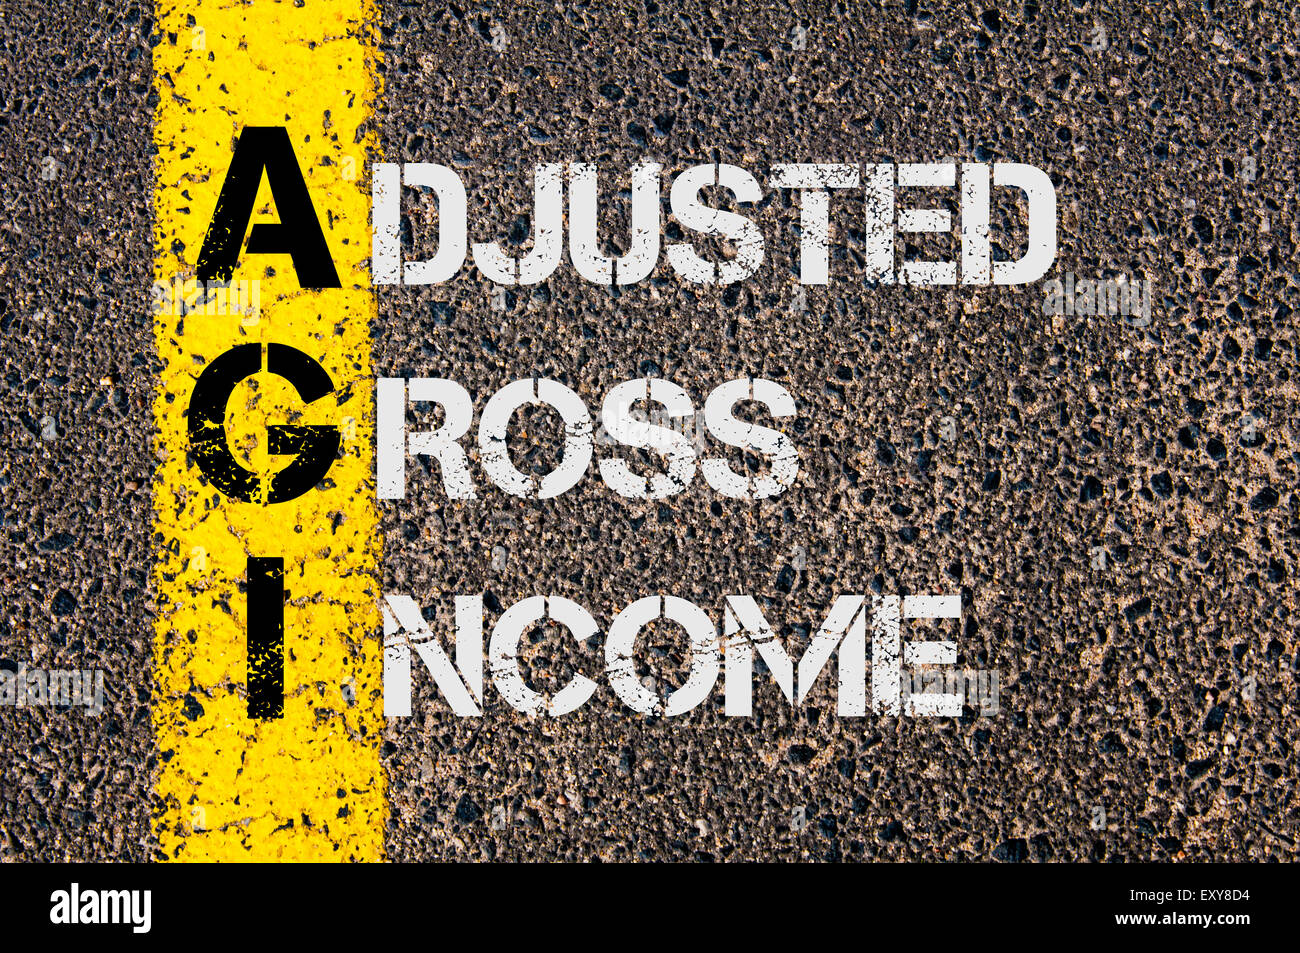 Concept image of Business Acronym AGI as Adjusted Gross Income  written over road marking yellow paint line. Stock Photo